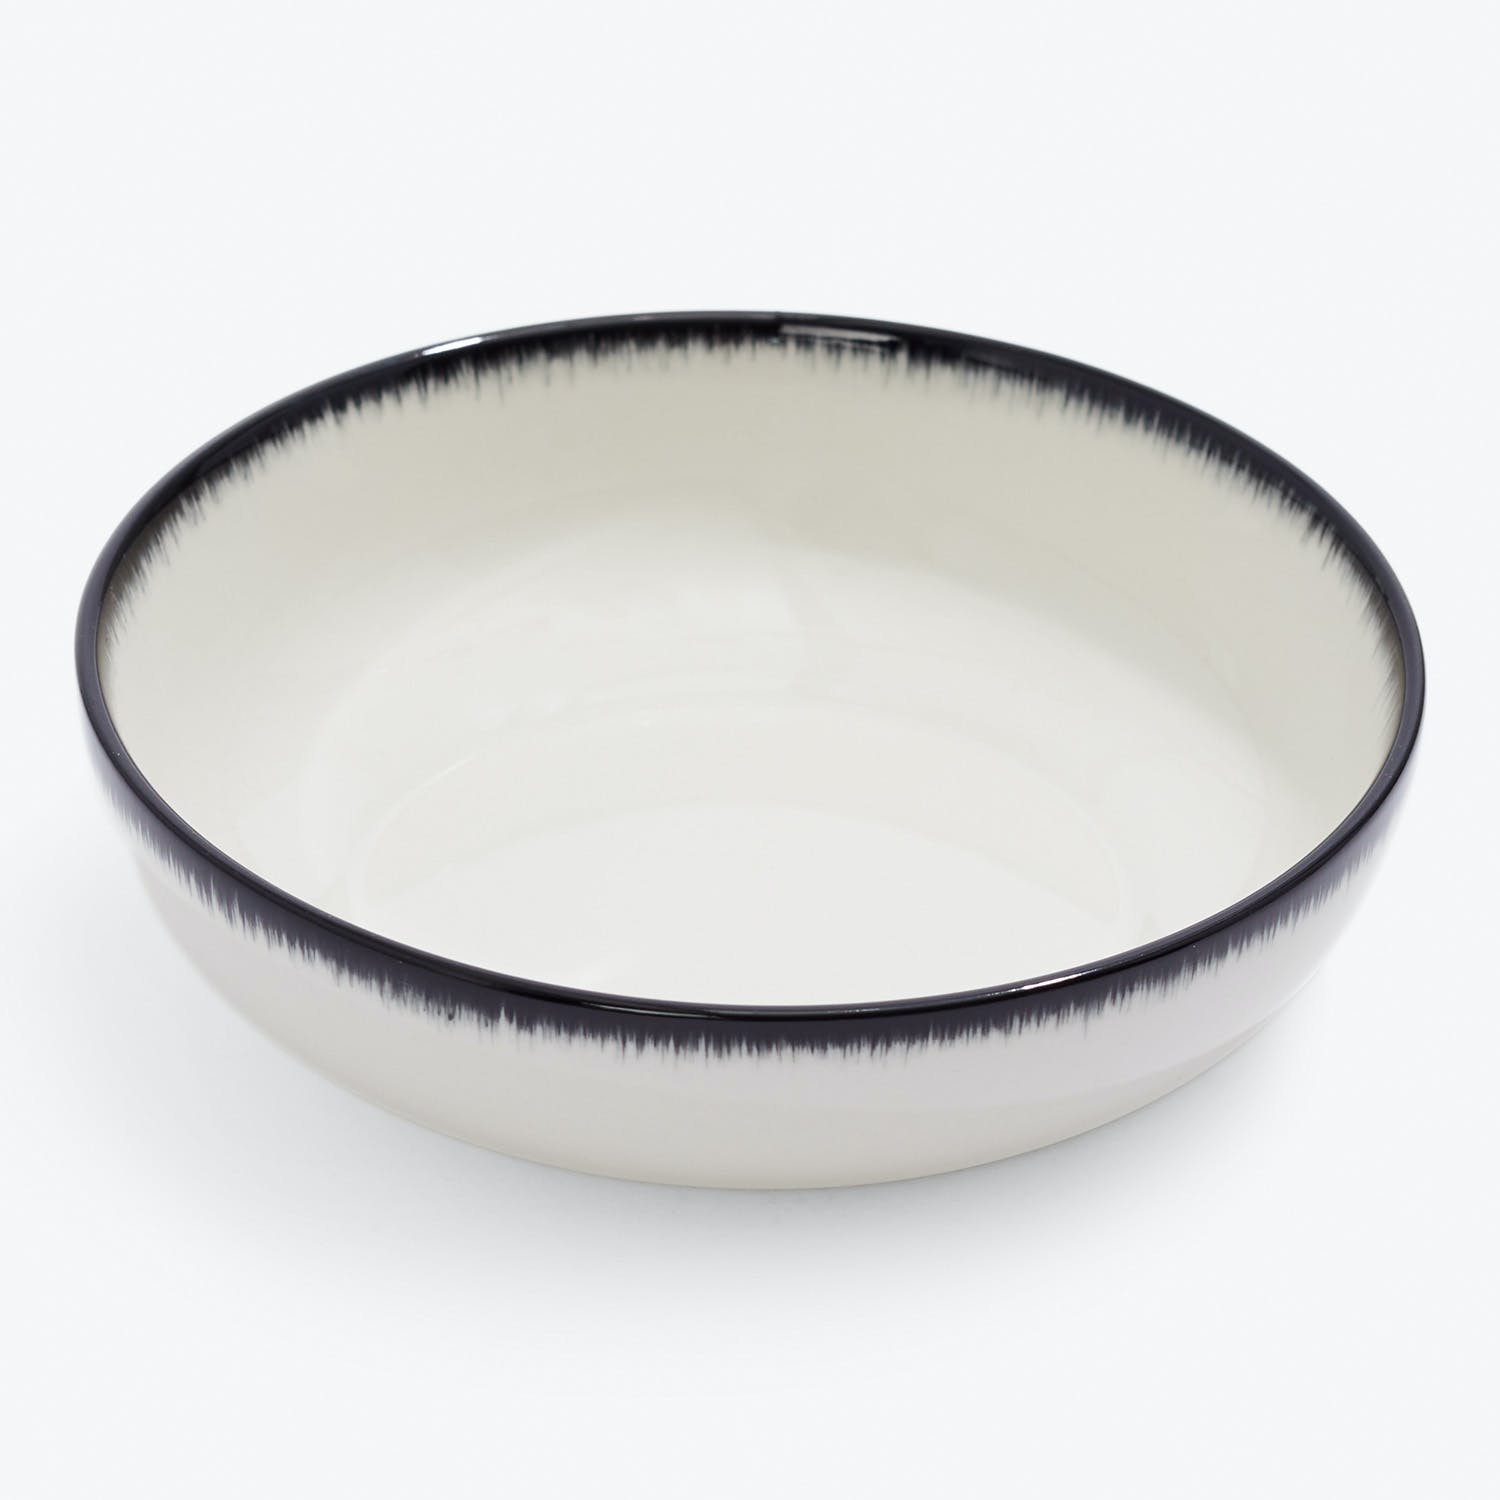 Minimalist ceramic bowl with handcrafted black border for versatile use.